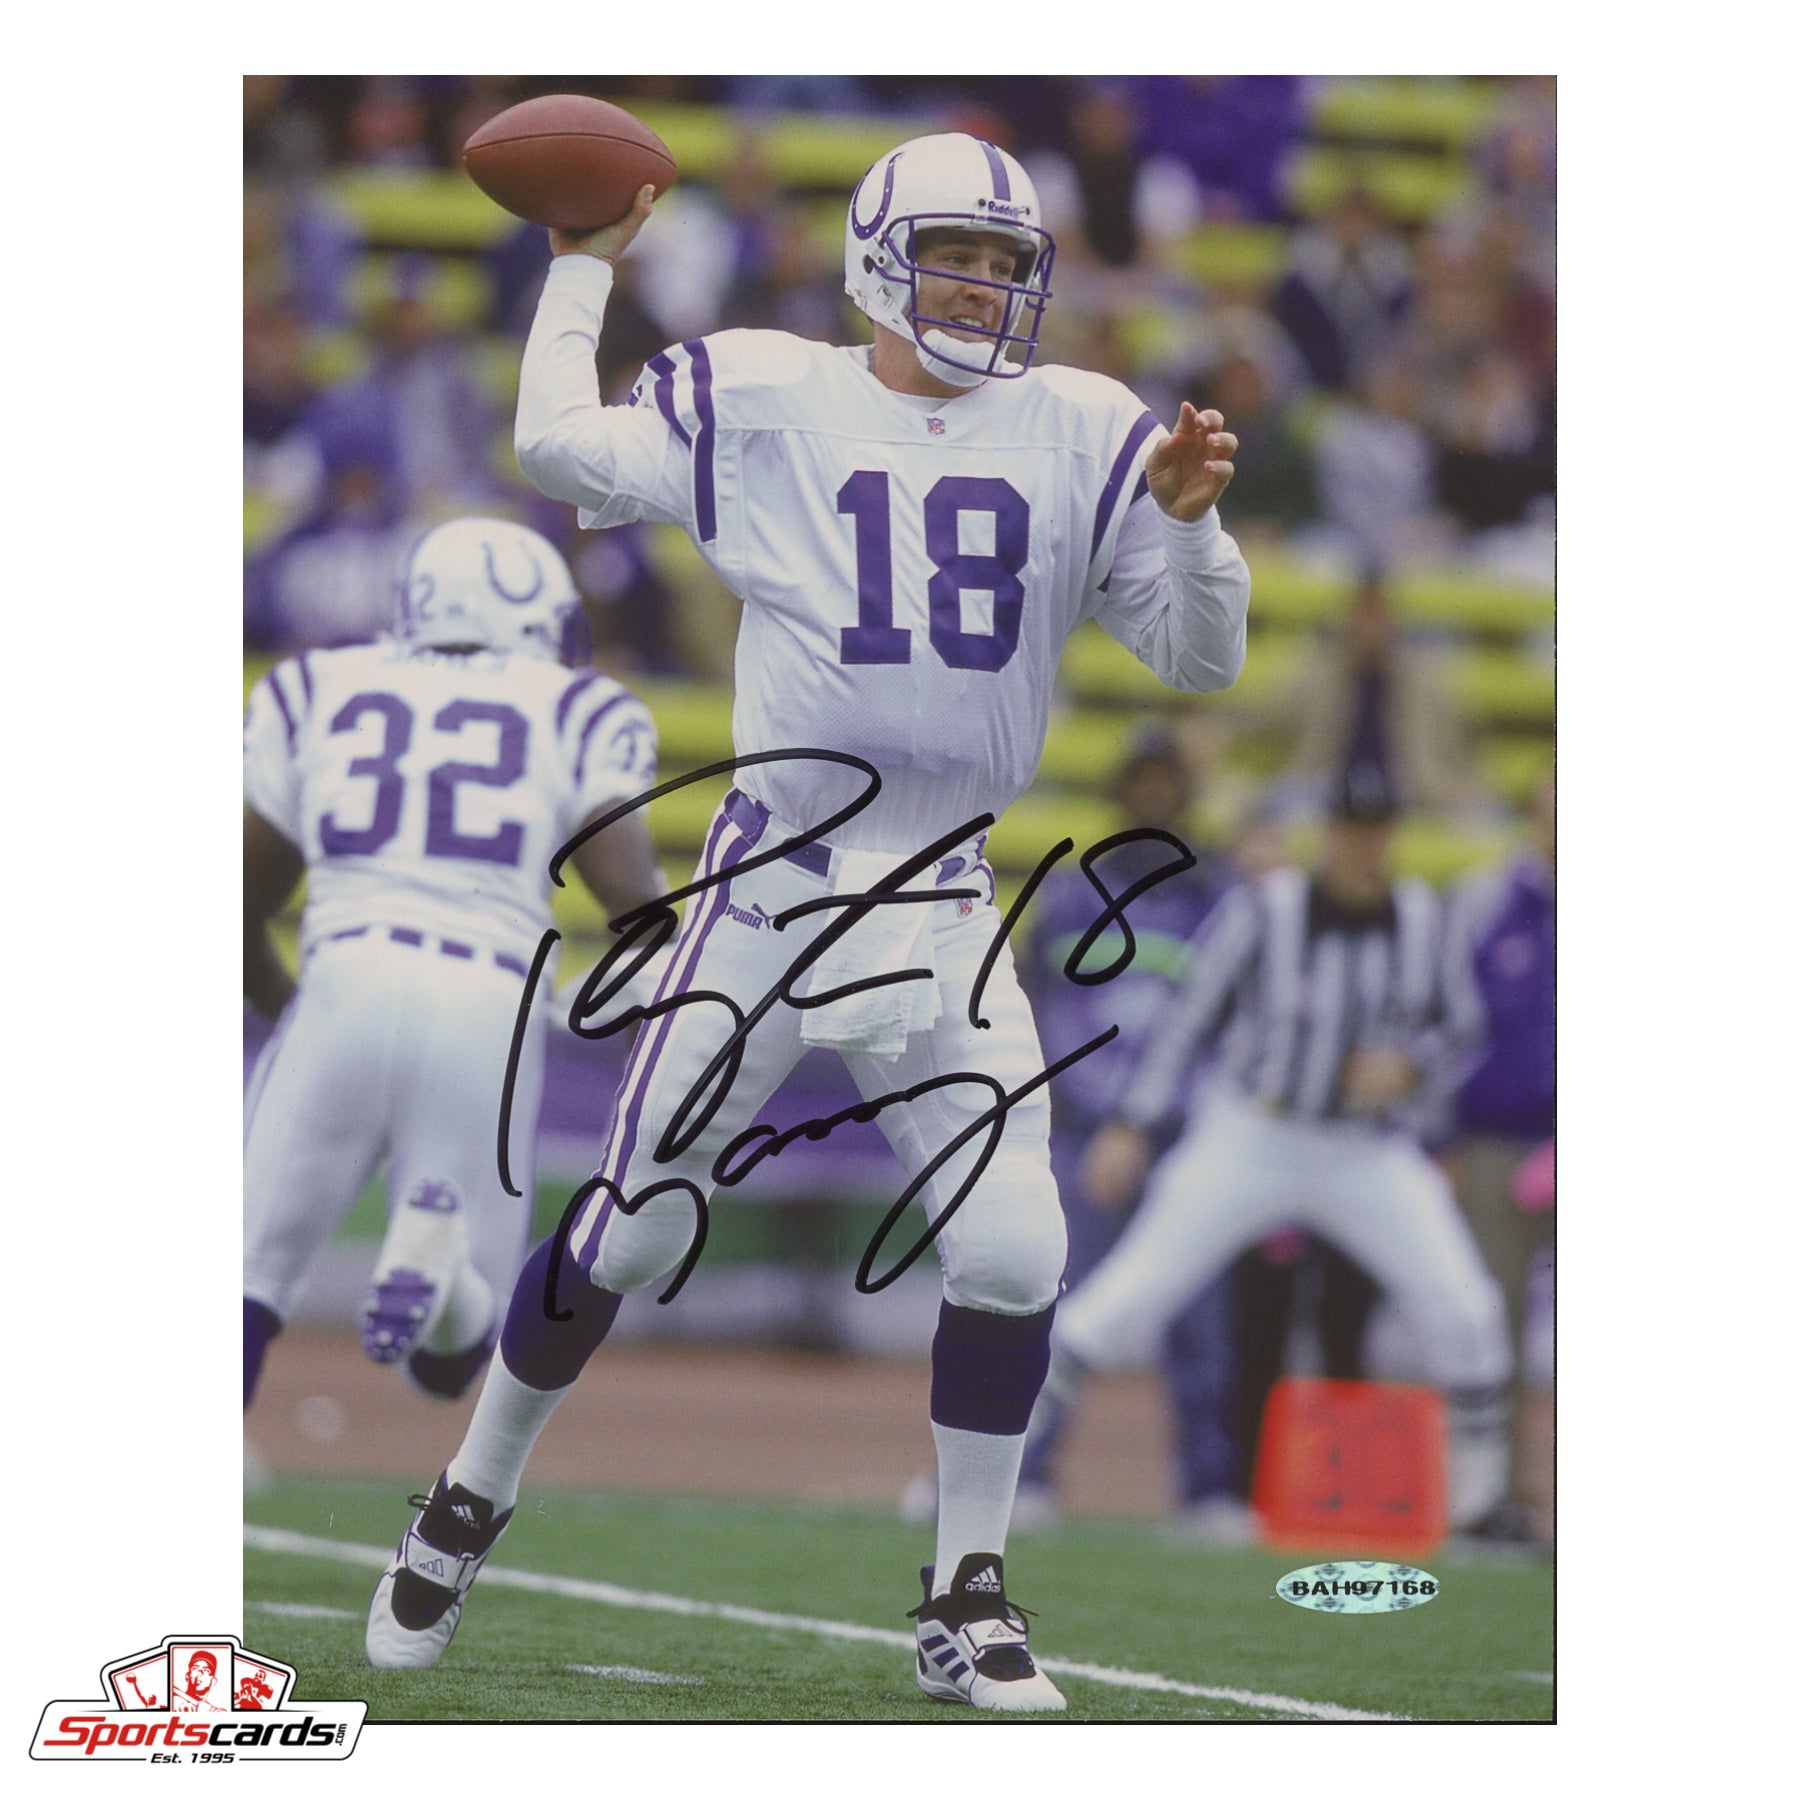 Peyton Manning Signed Indianapolis Colts 8x10 Photograph - Upper Deck COA